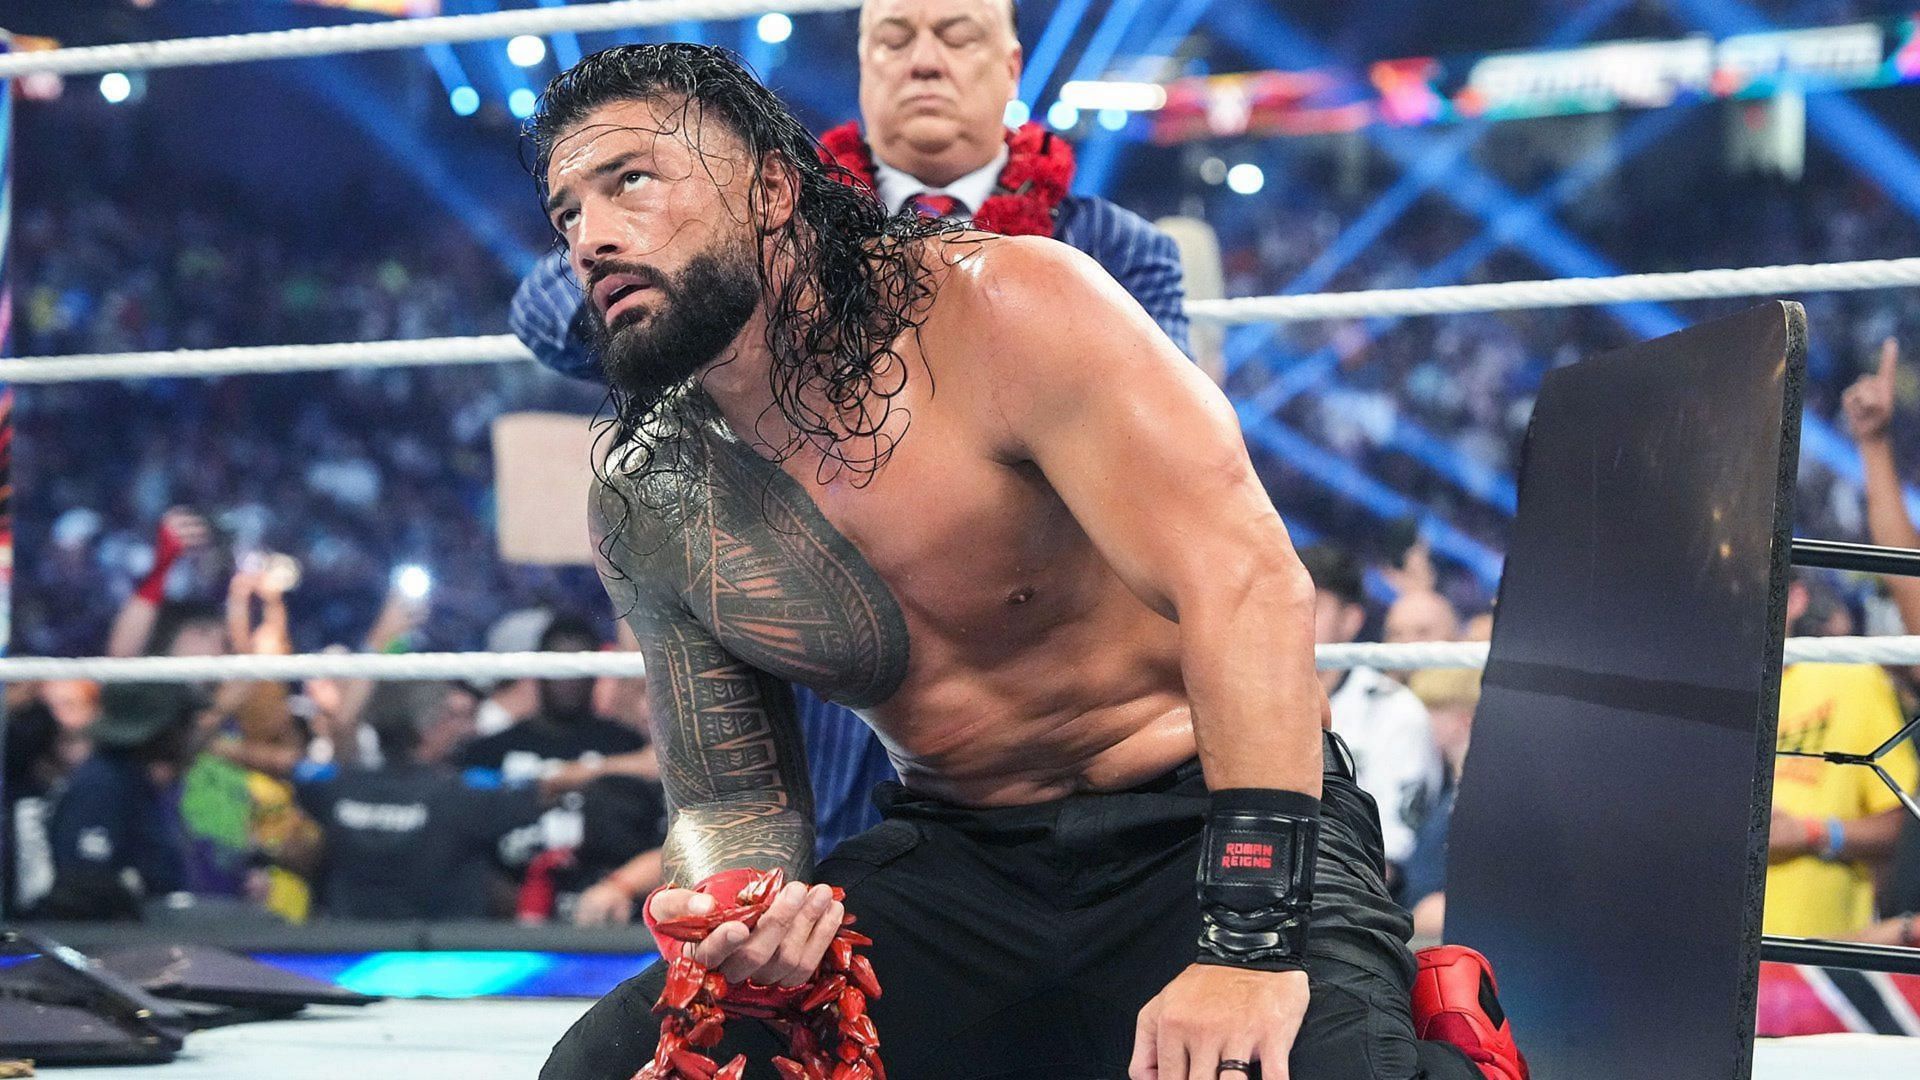 Roman Reigns suffered legit injury at SummerSlam; status for WWE